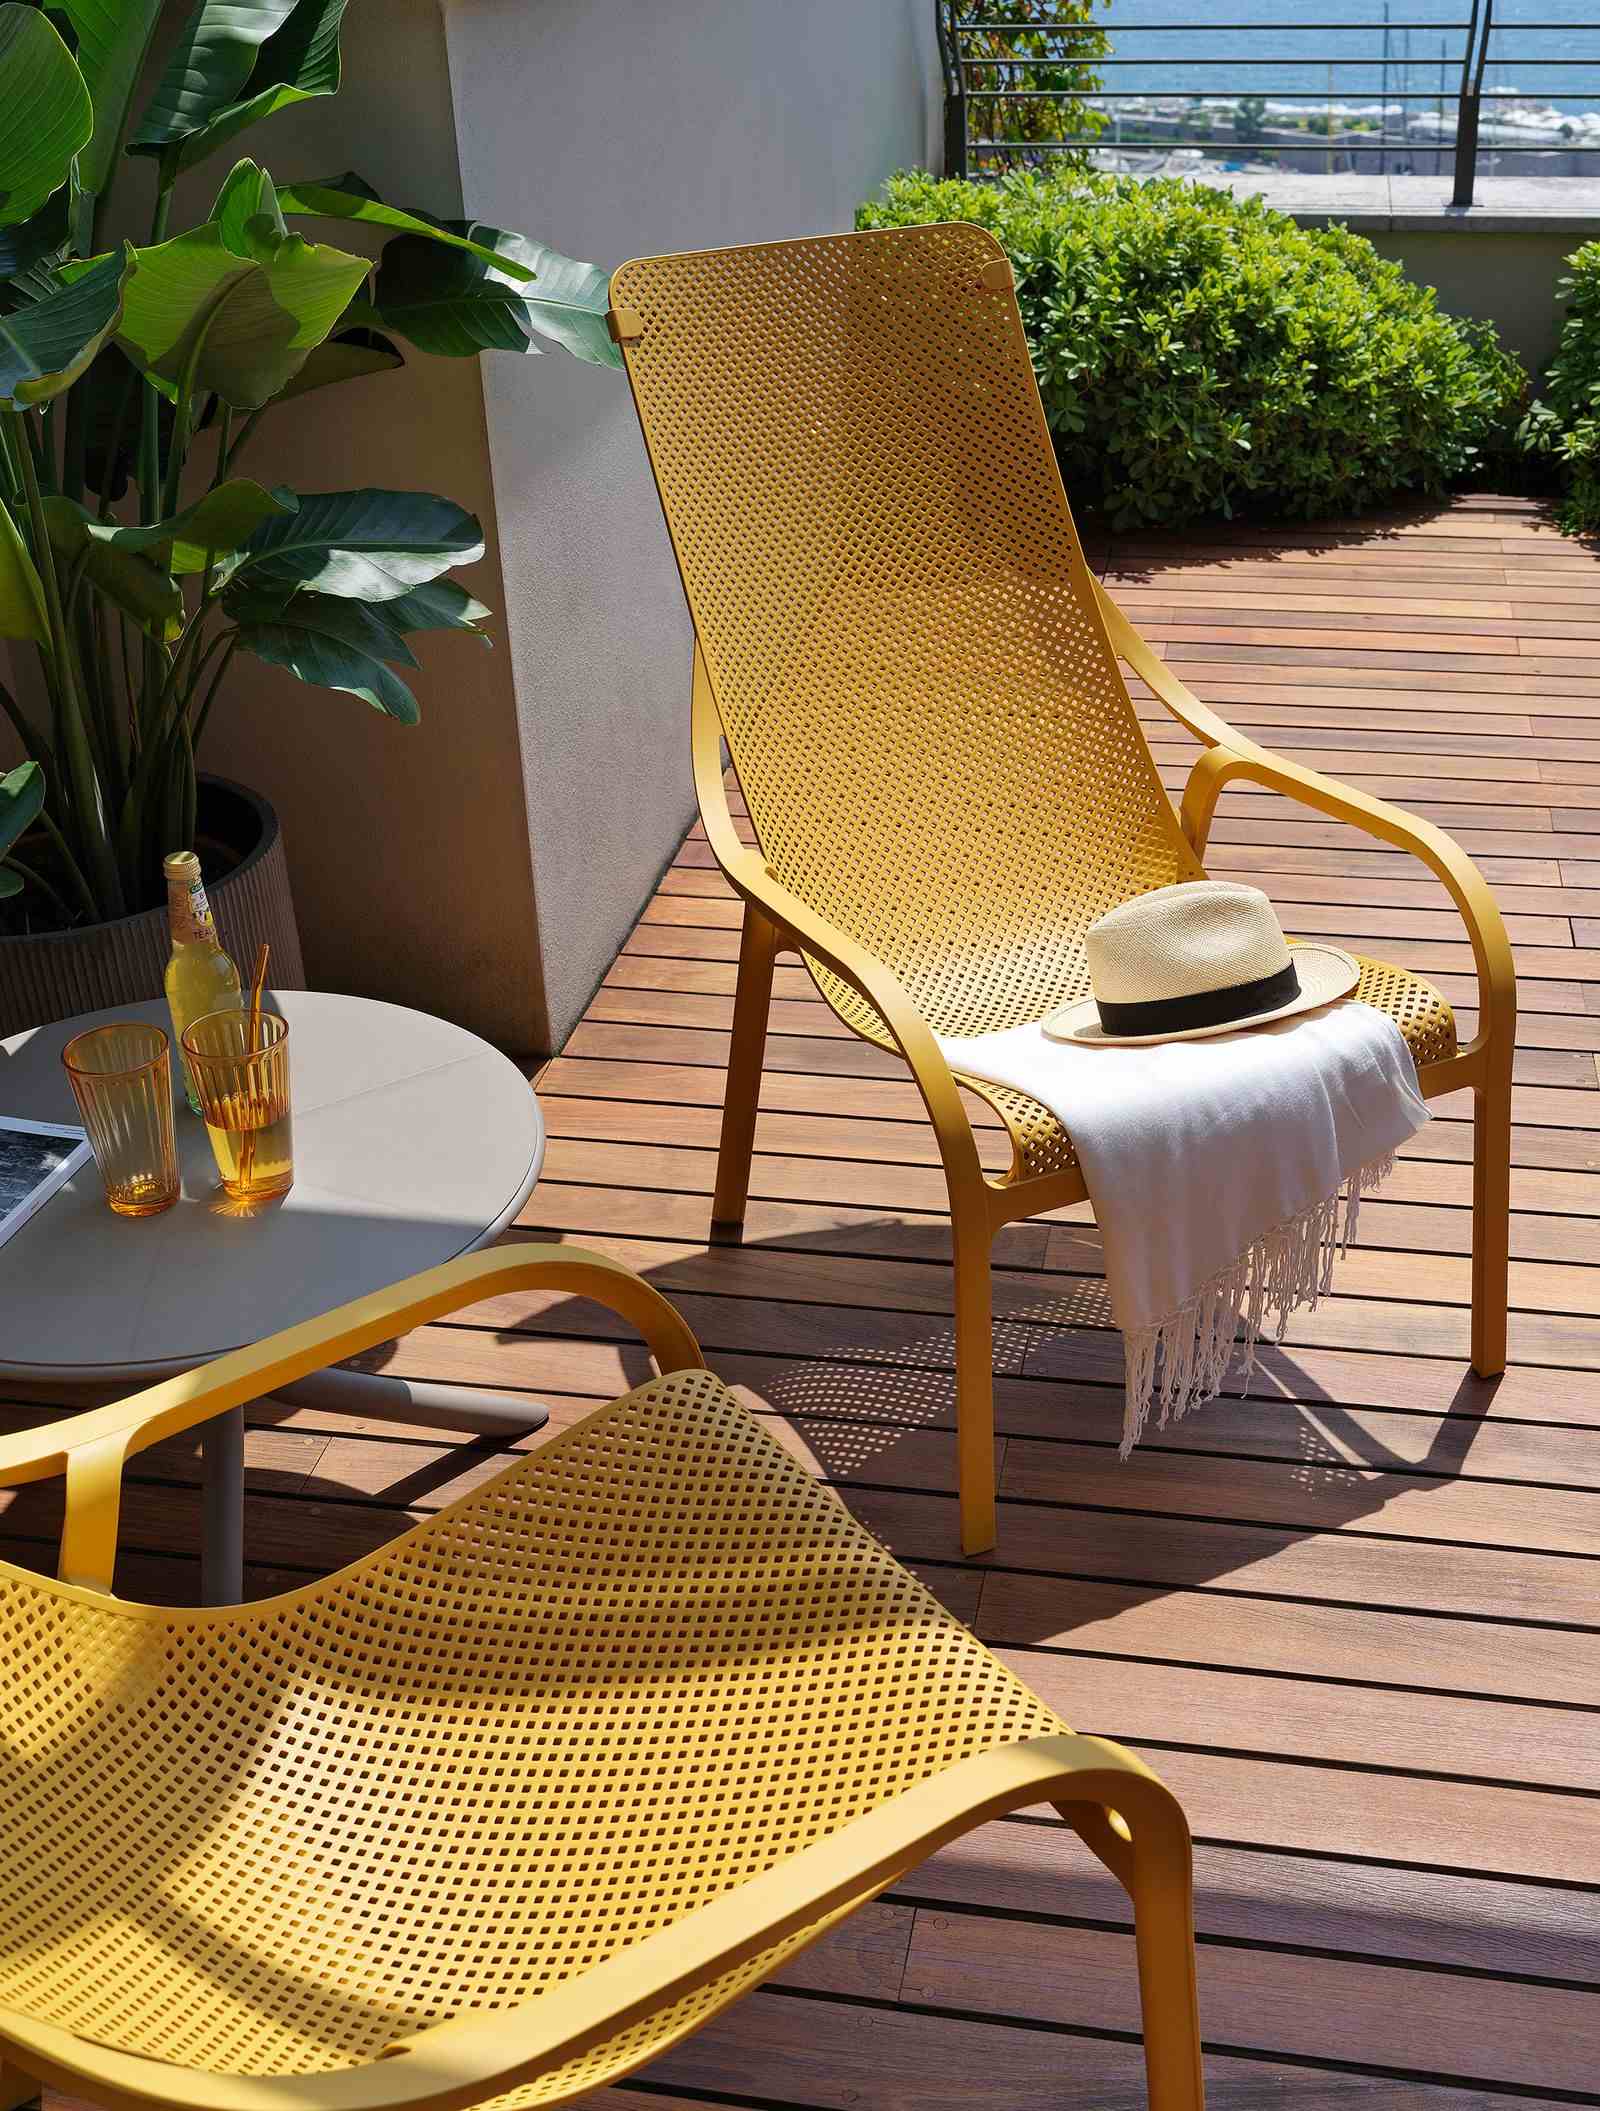 Remarkable Outdoor Living. Nardi Net Outdoor Resin Balcony Lounge Chair. This image shows a vibrant outdoor setting with a yellow perforated metal lounge chair and matching table set against a backdrop of lush greenery and a clear sky. A white hat with a black band rests on the chair, adding a leisurely touch to the scene. The ensemble is situated on a wooden deck, enhancing the warm and inviting ambiance perfect for relaxation or socializing outdoors.